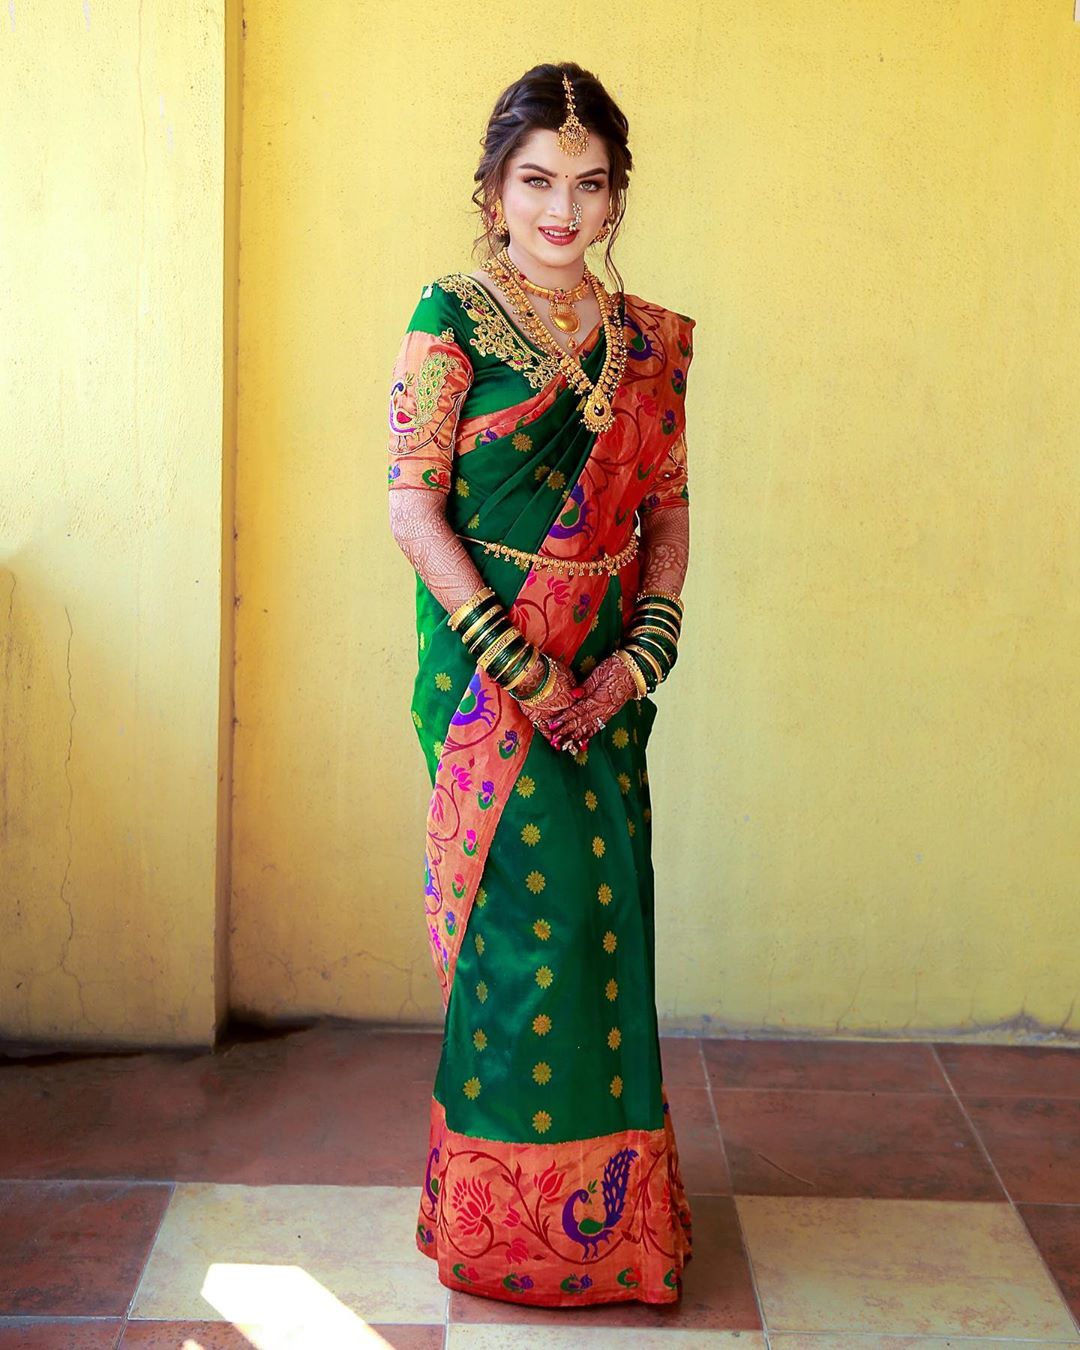 What is the average cost of an authentic Paithani? - Quora